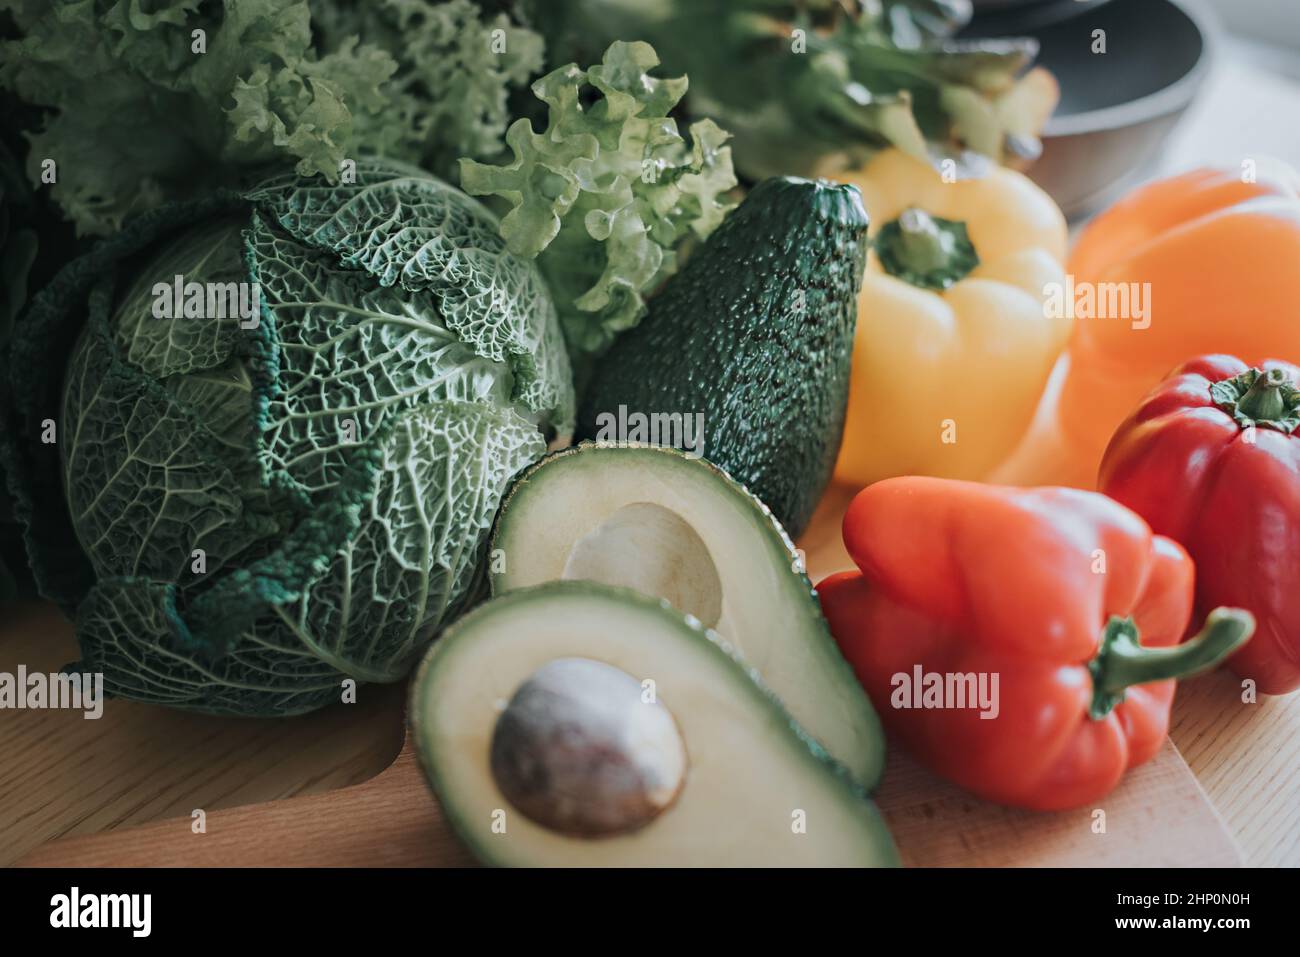 Vegetables are on the table. Vegetarian concept. Healthy food. Stock Photo